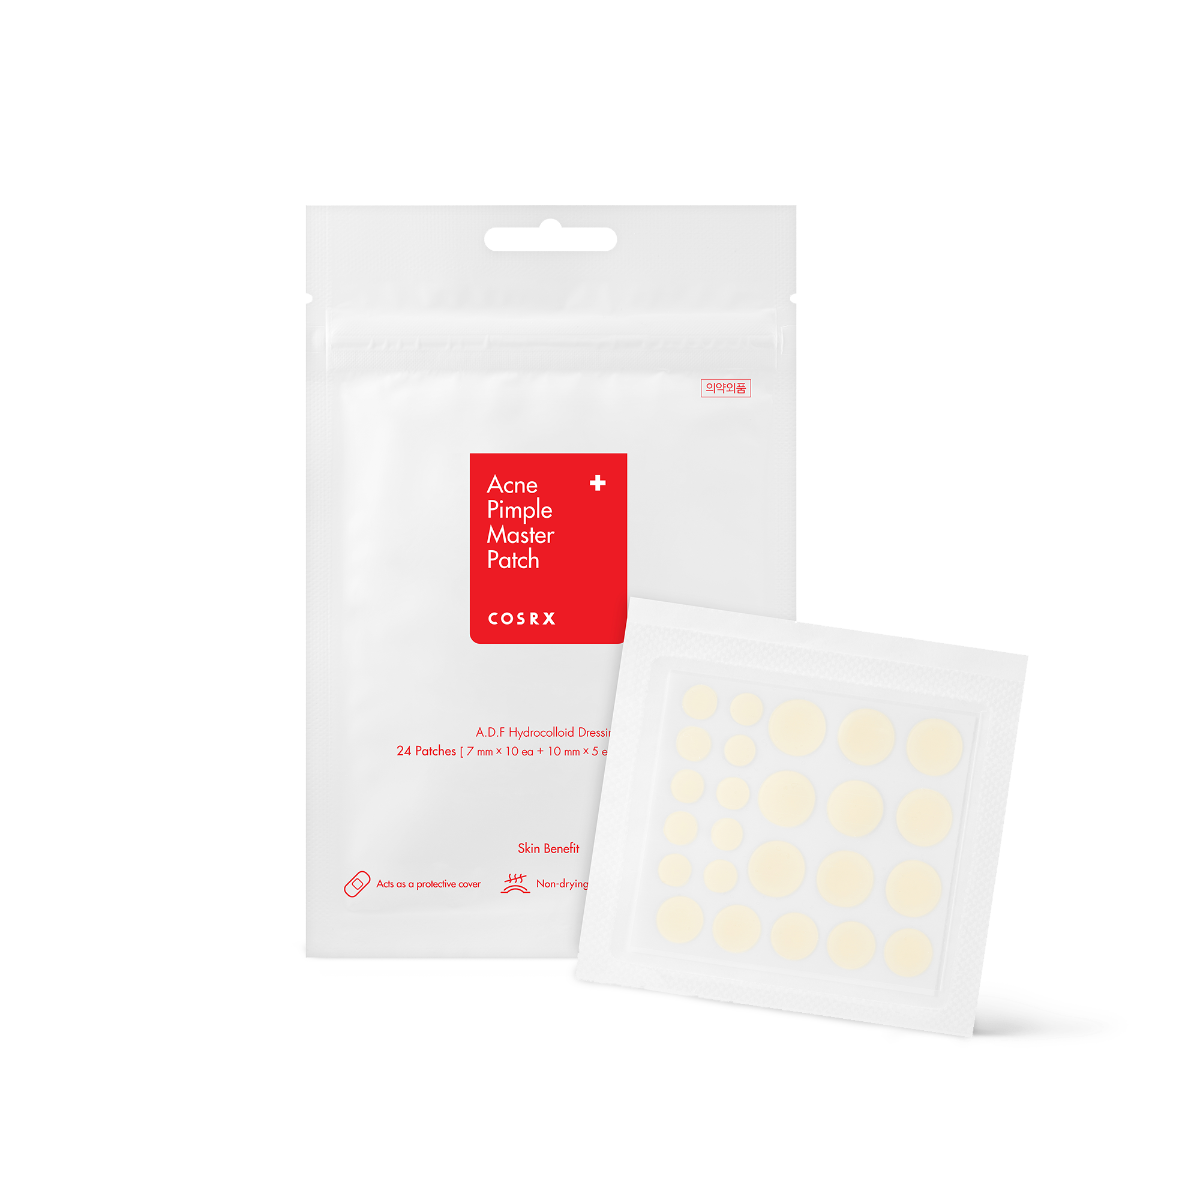 Acne Pimple Master Patch - BASIC MADE CO